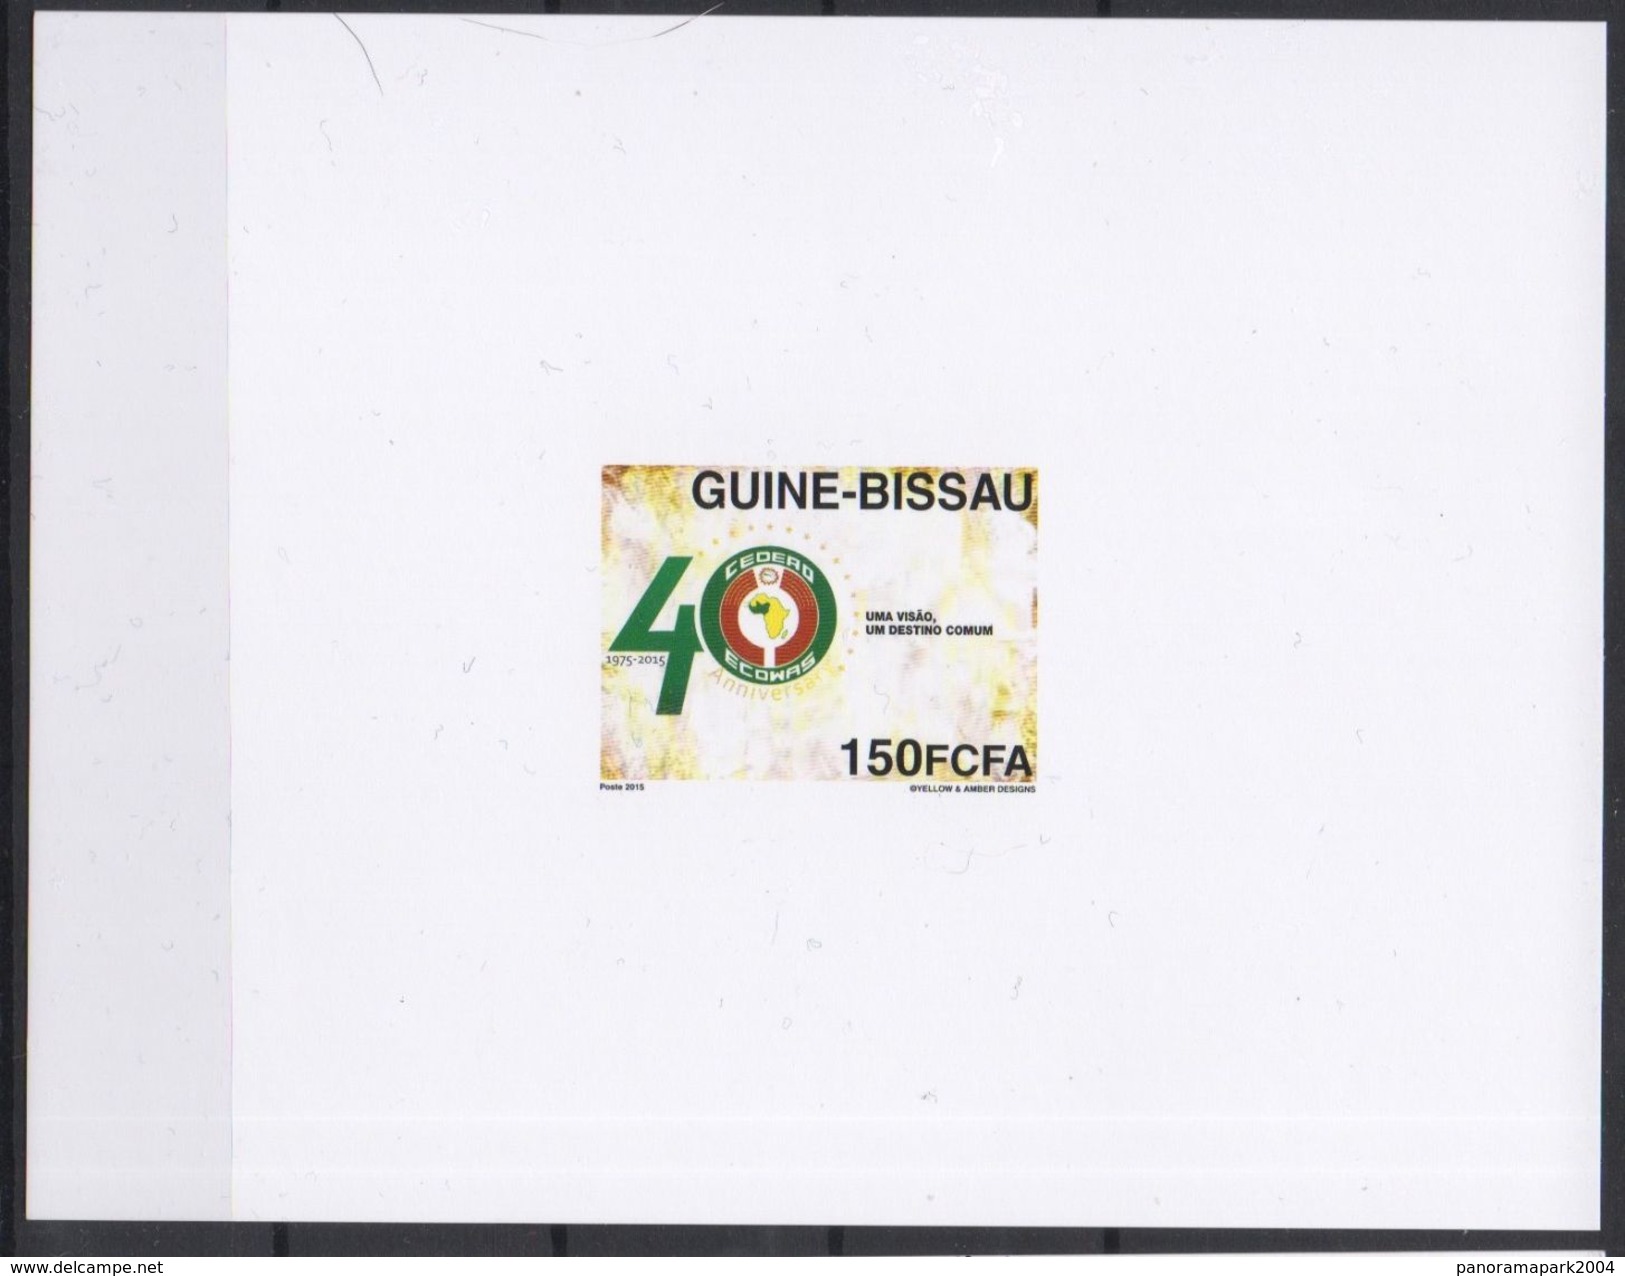 Guiné Bissau 2015 Scarce Proof EPREUVE DE LUXE Emission Commune Joint Issue CEDEAO ECOWAS 40 Ans 40 Years - Joint Issues